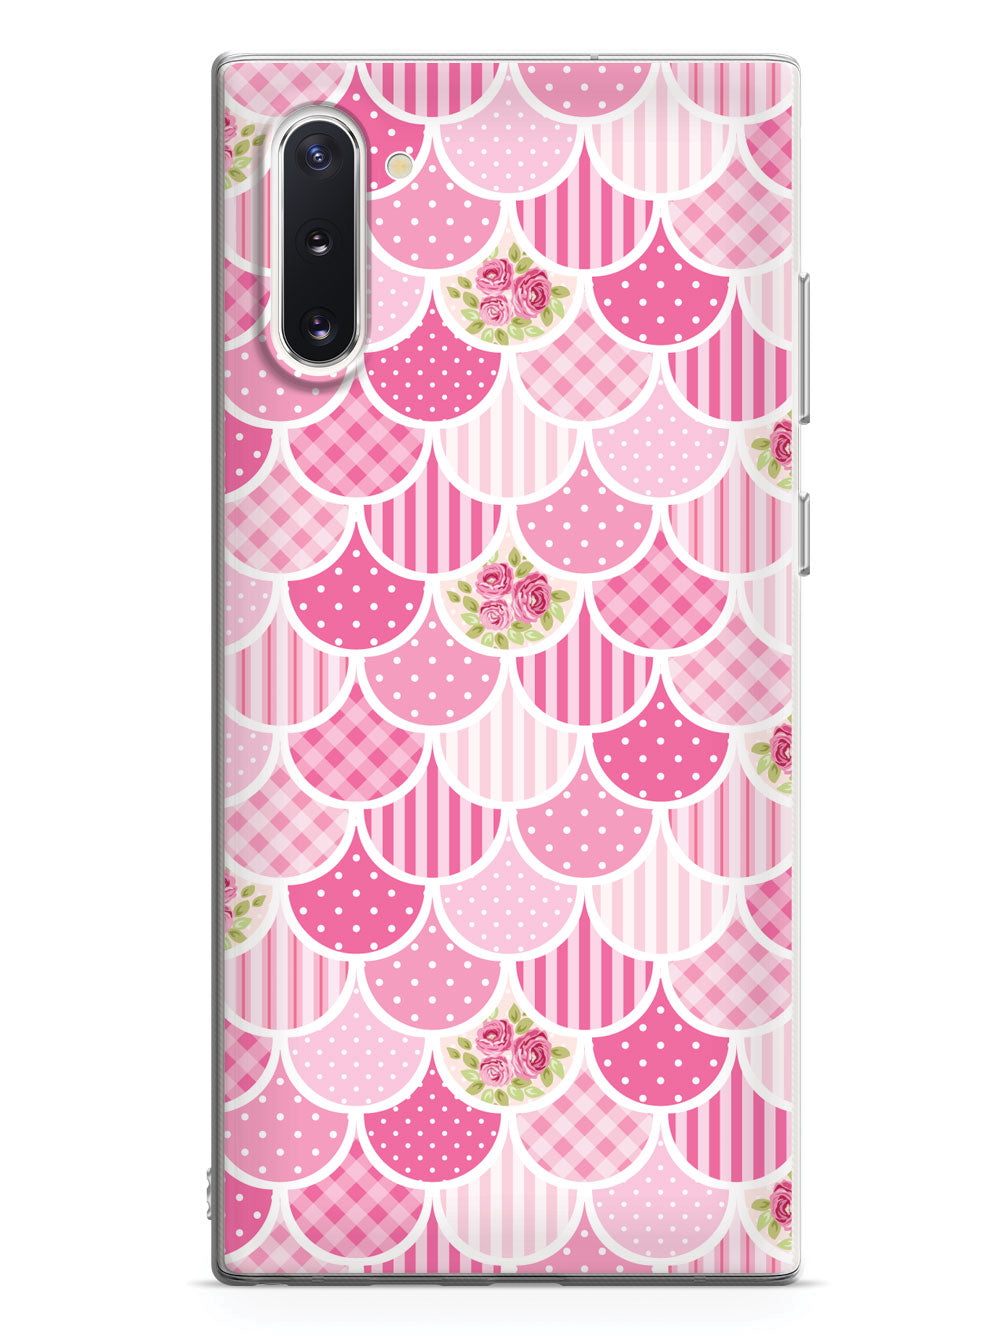 Mermaid Scales - Pink Patchwork - White Case